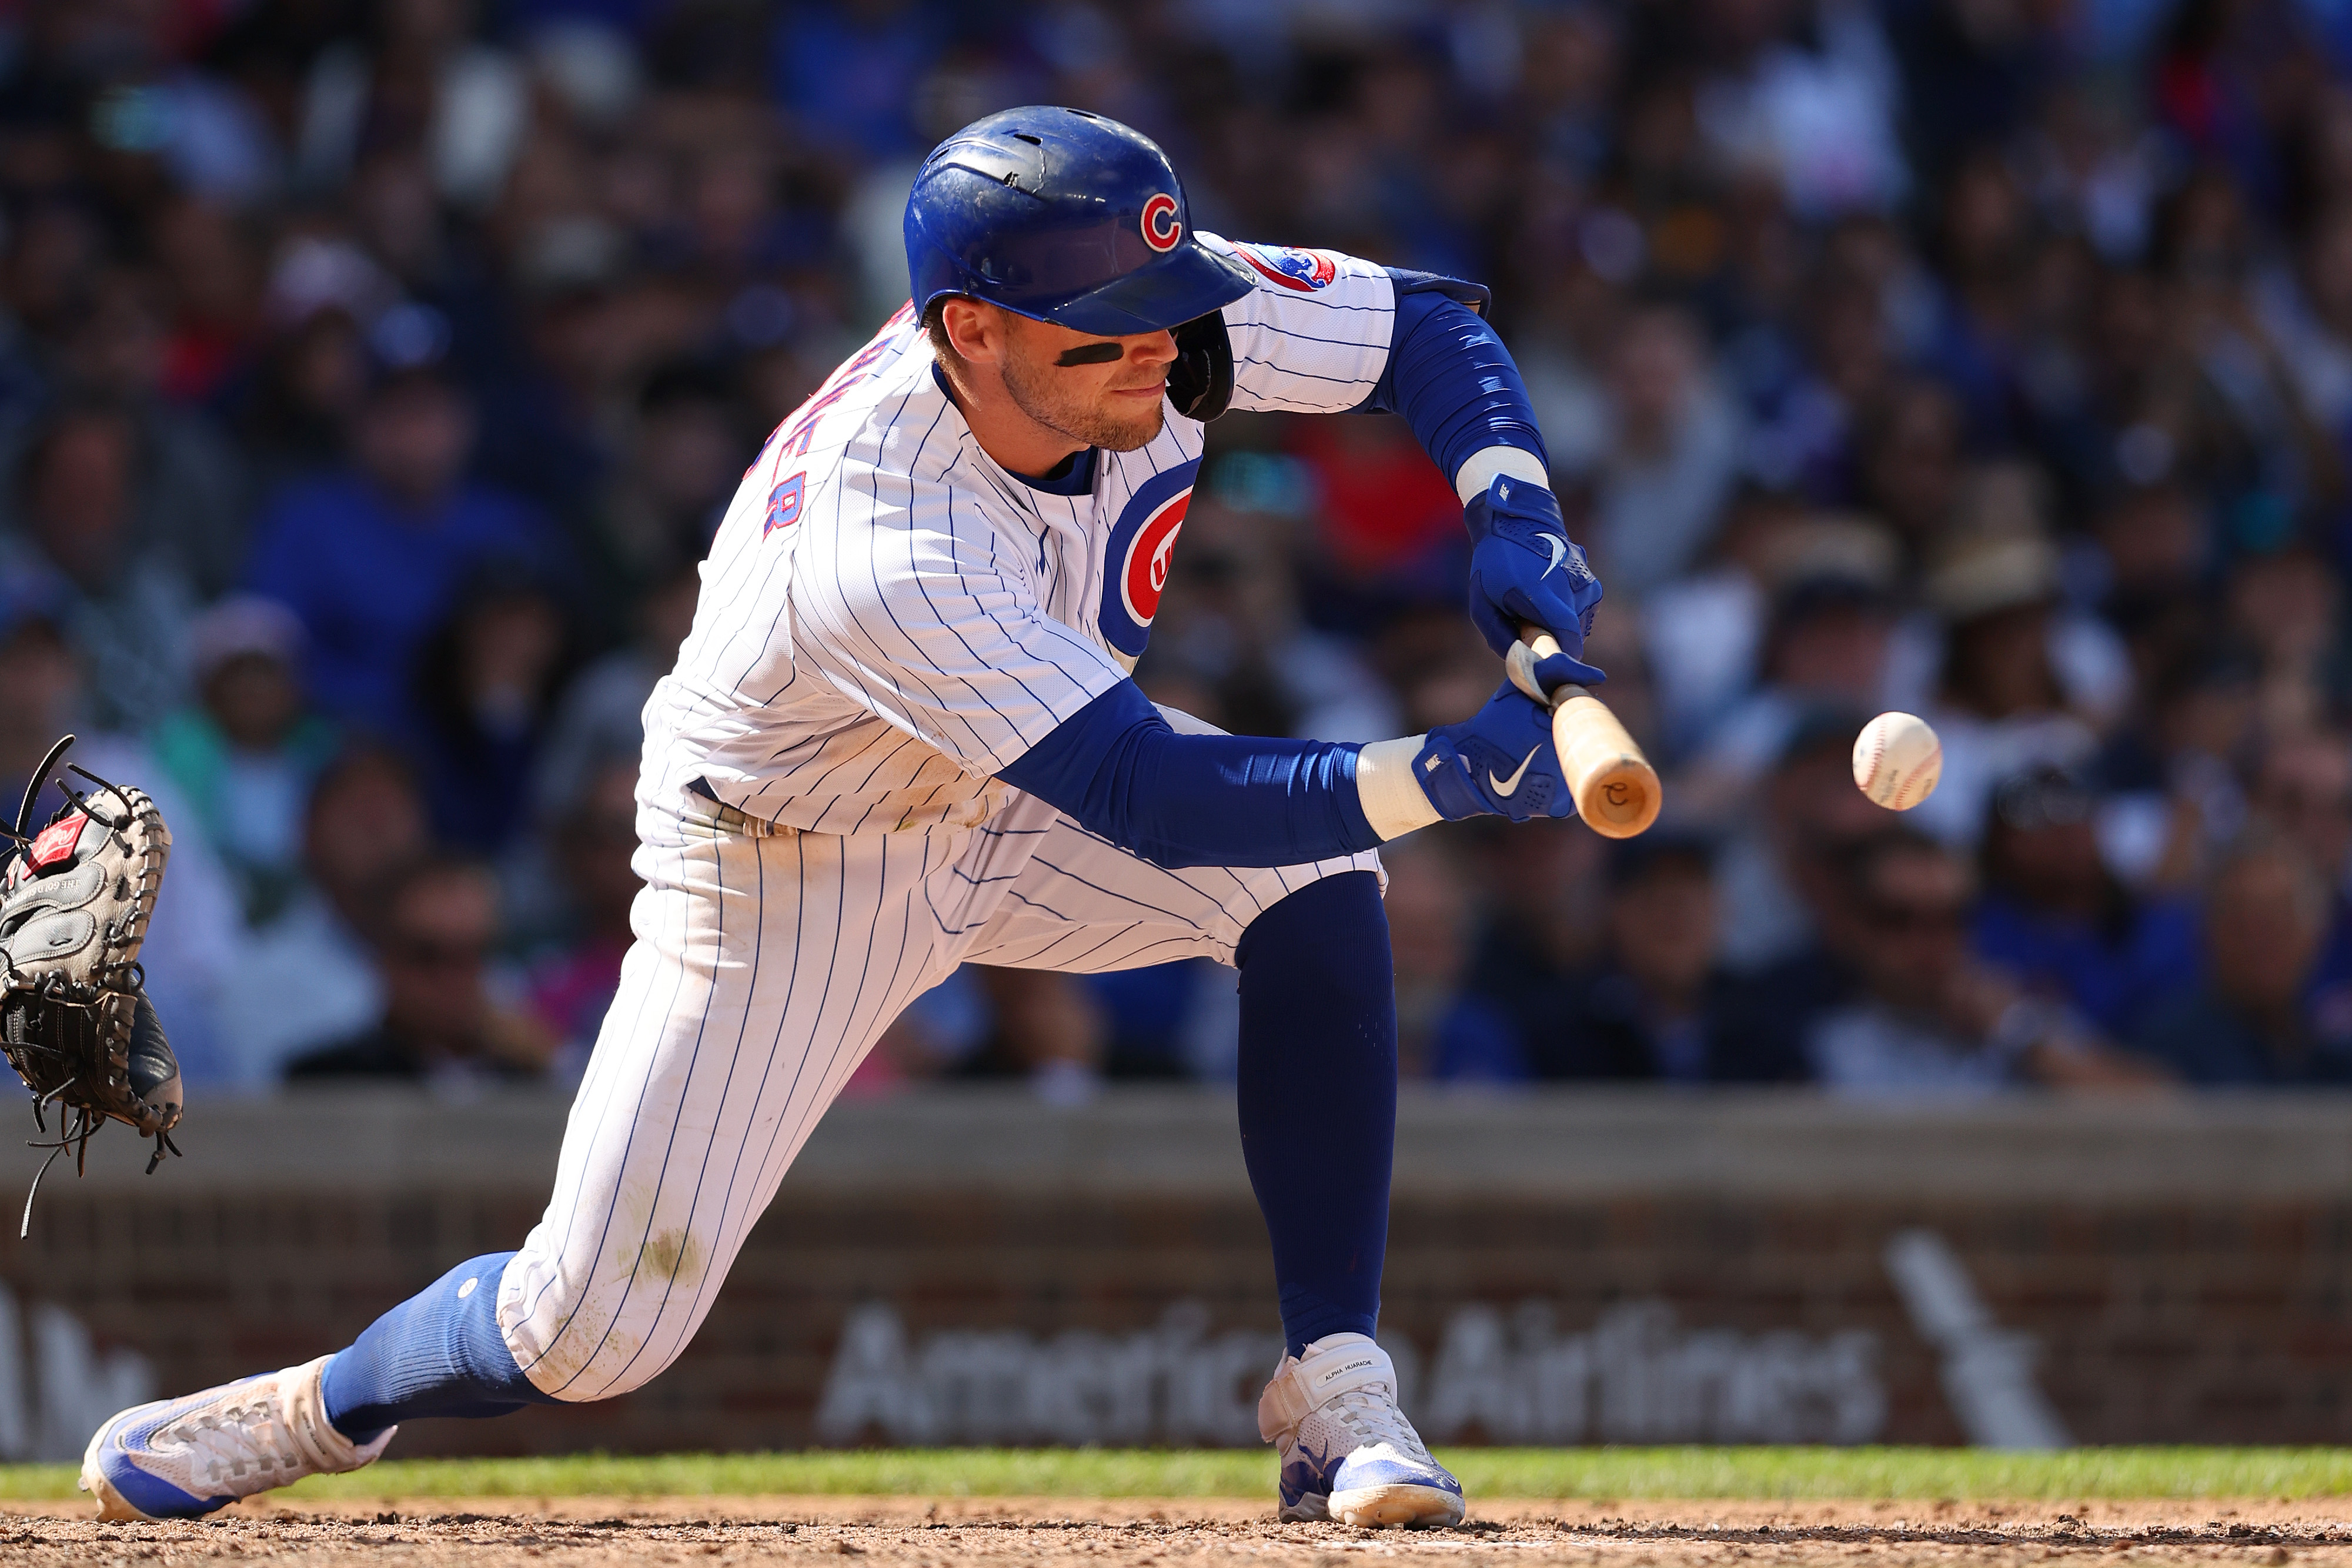 Cody Bellinger's ricochet infield single sparks Cubs over Brewers